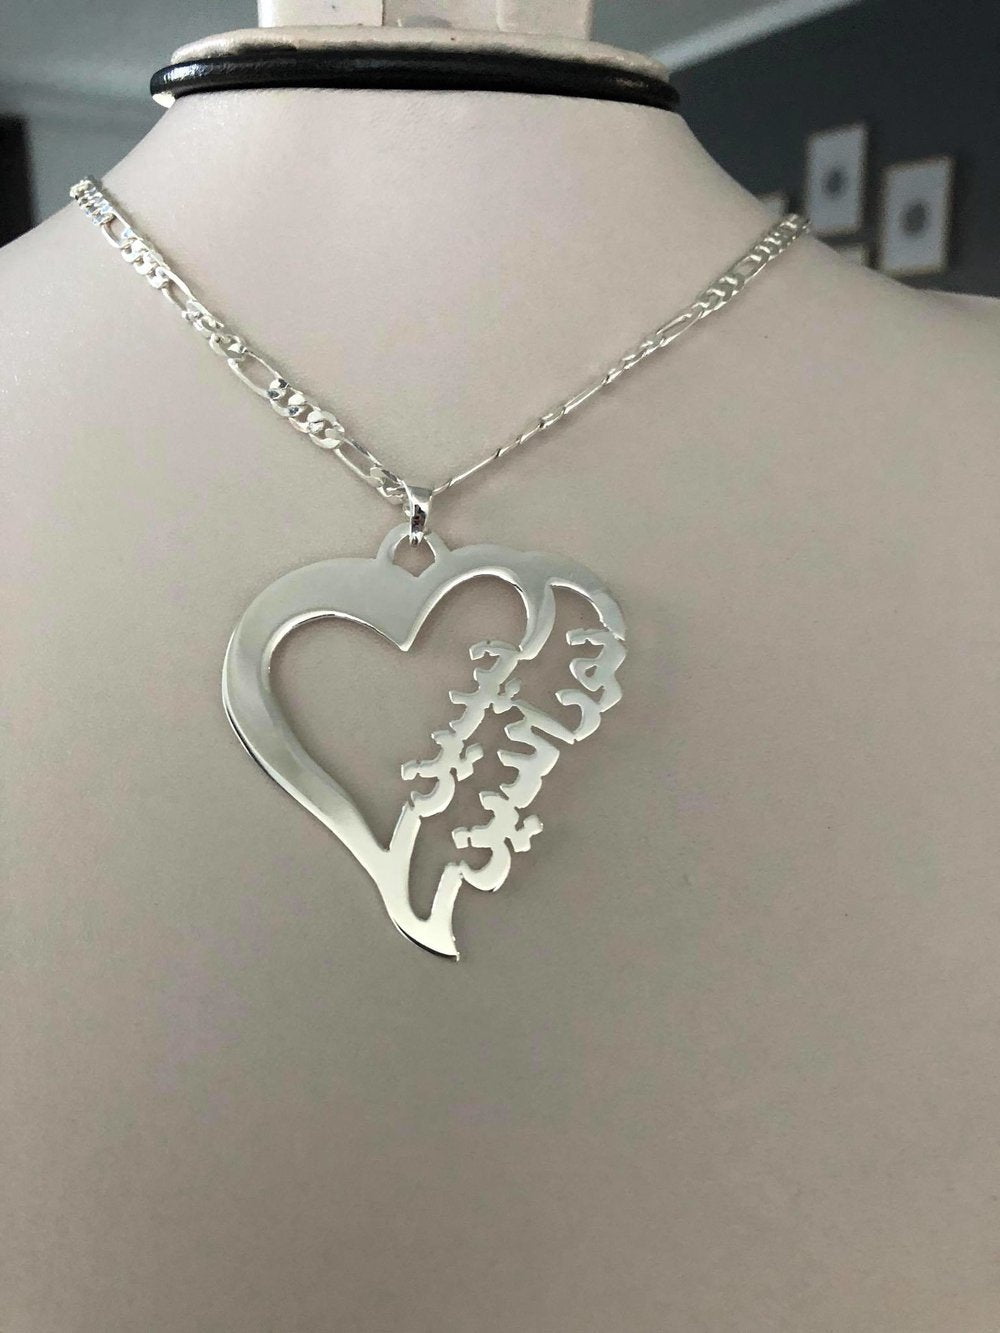 2 name necklace - couples name on heart